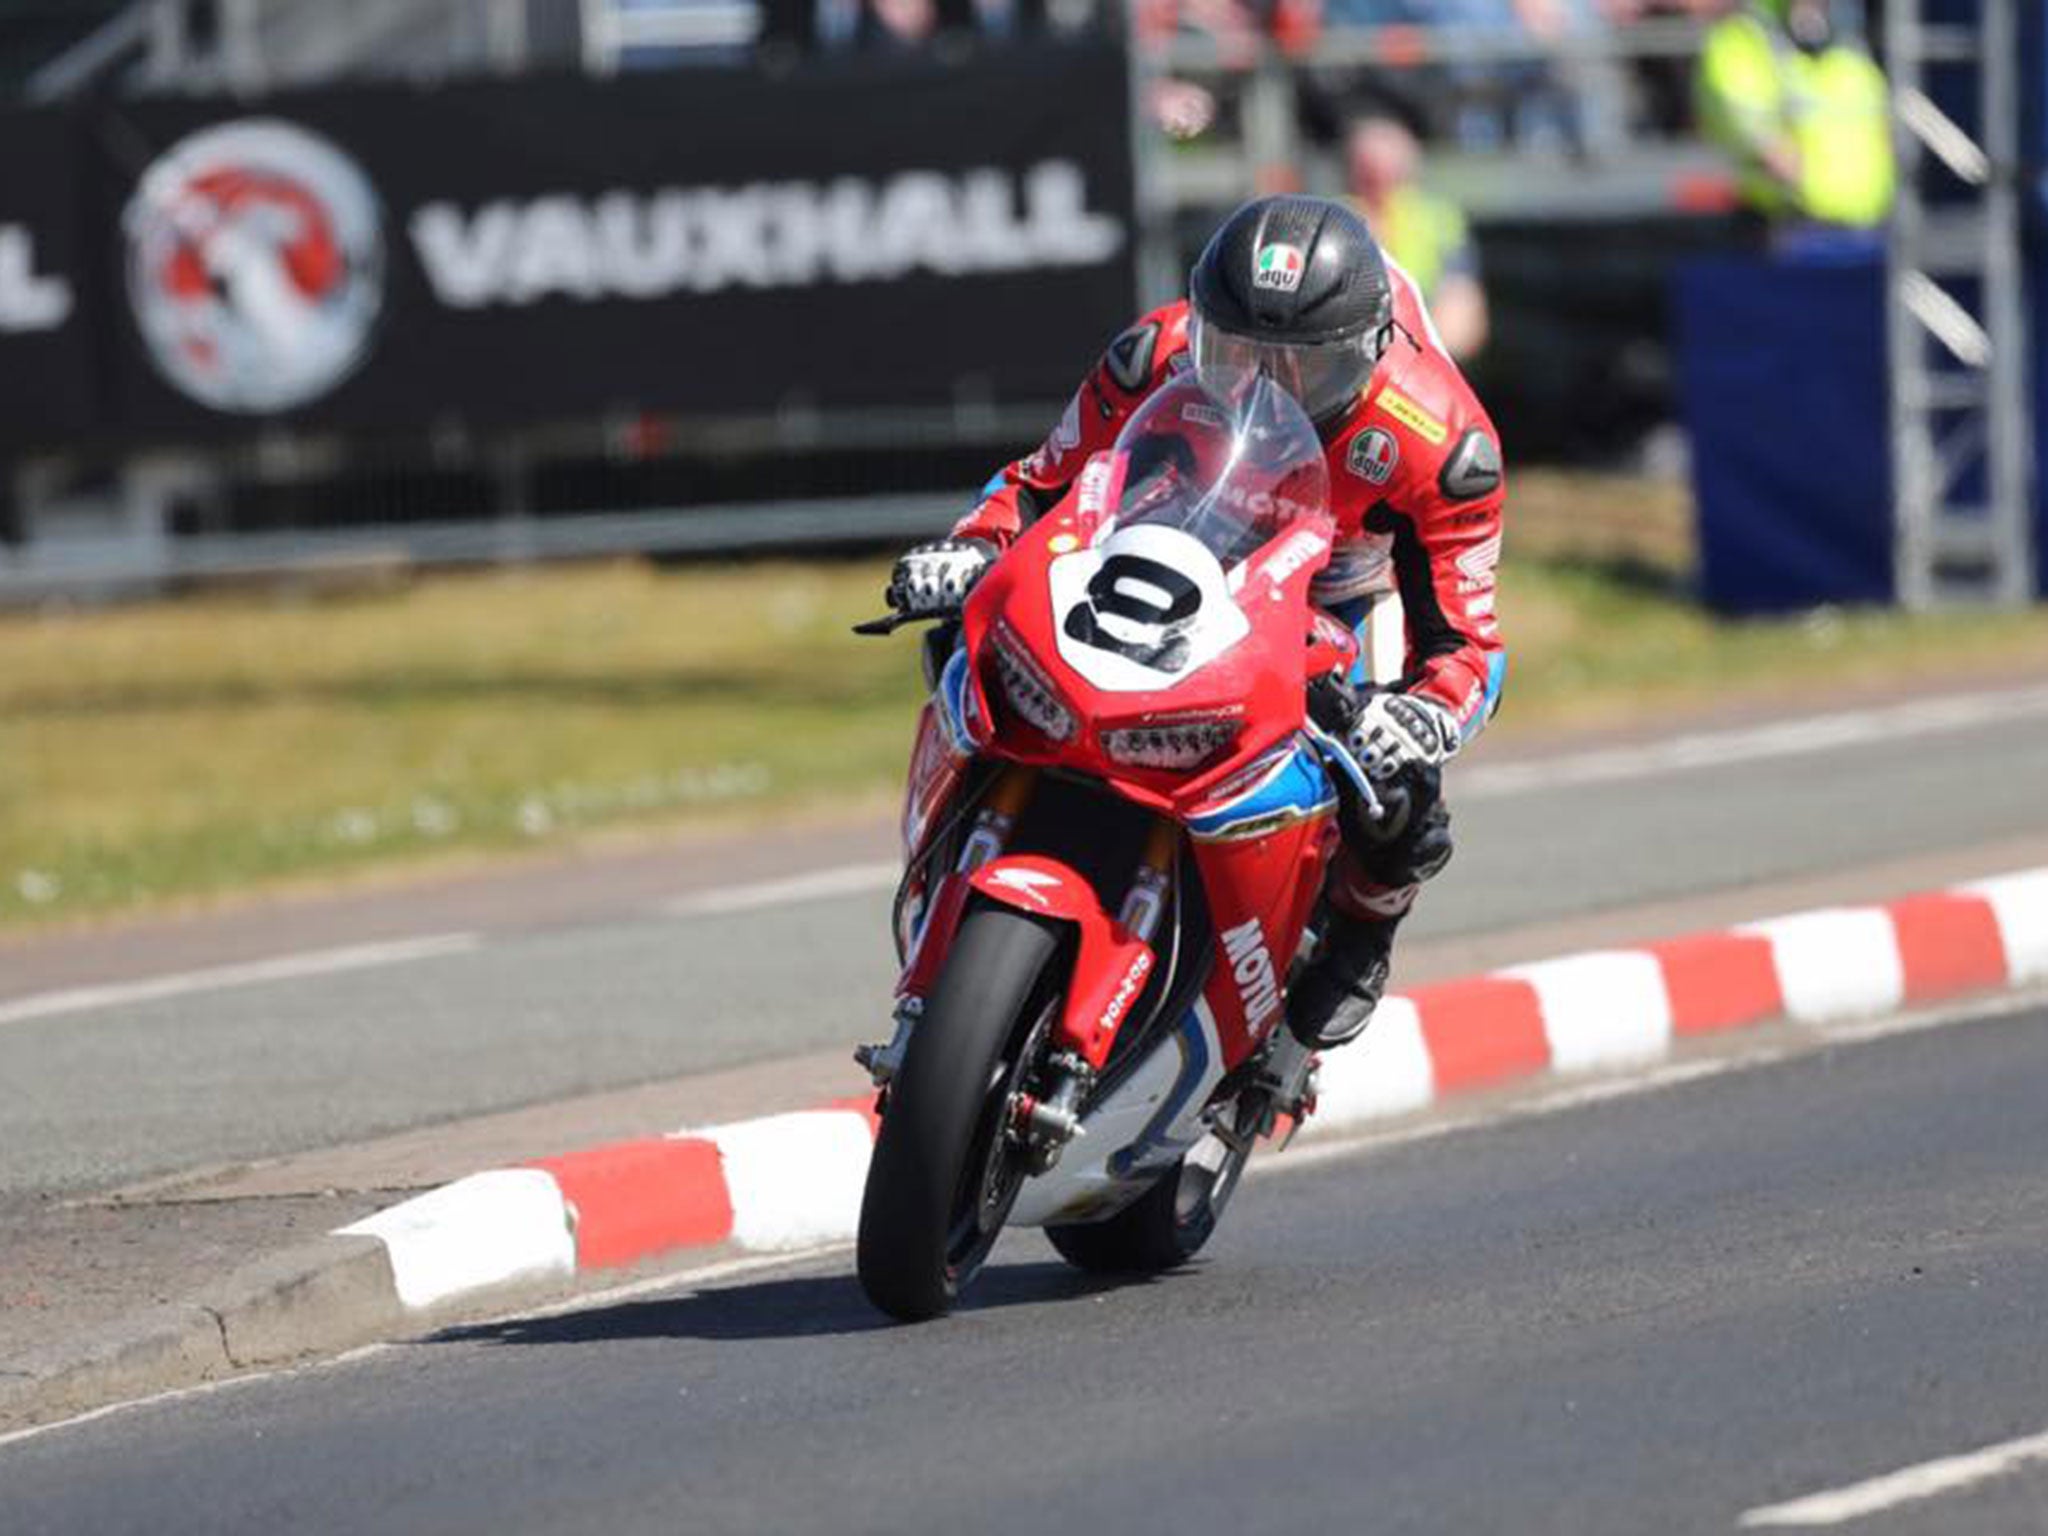 Guy Martin struggled for pace on his return to the North West 200